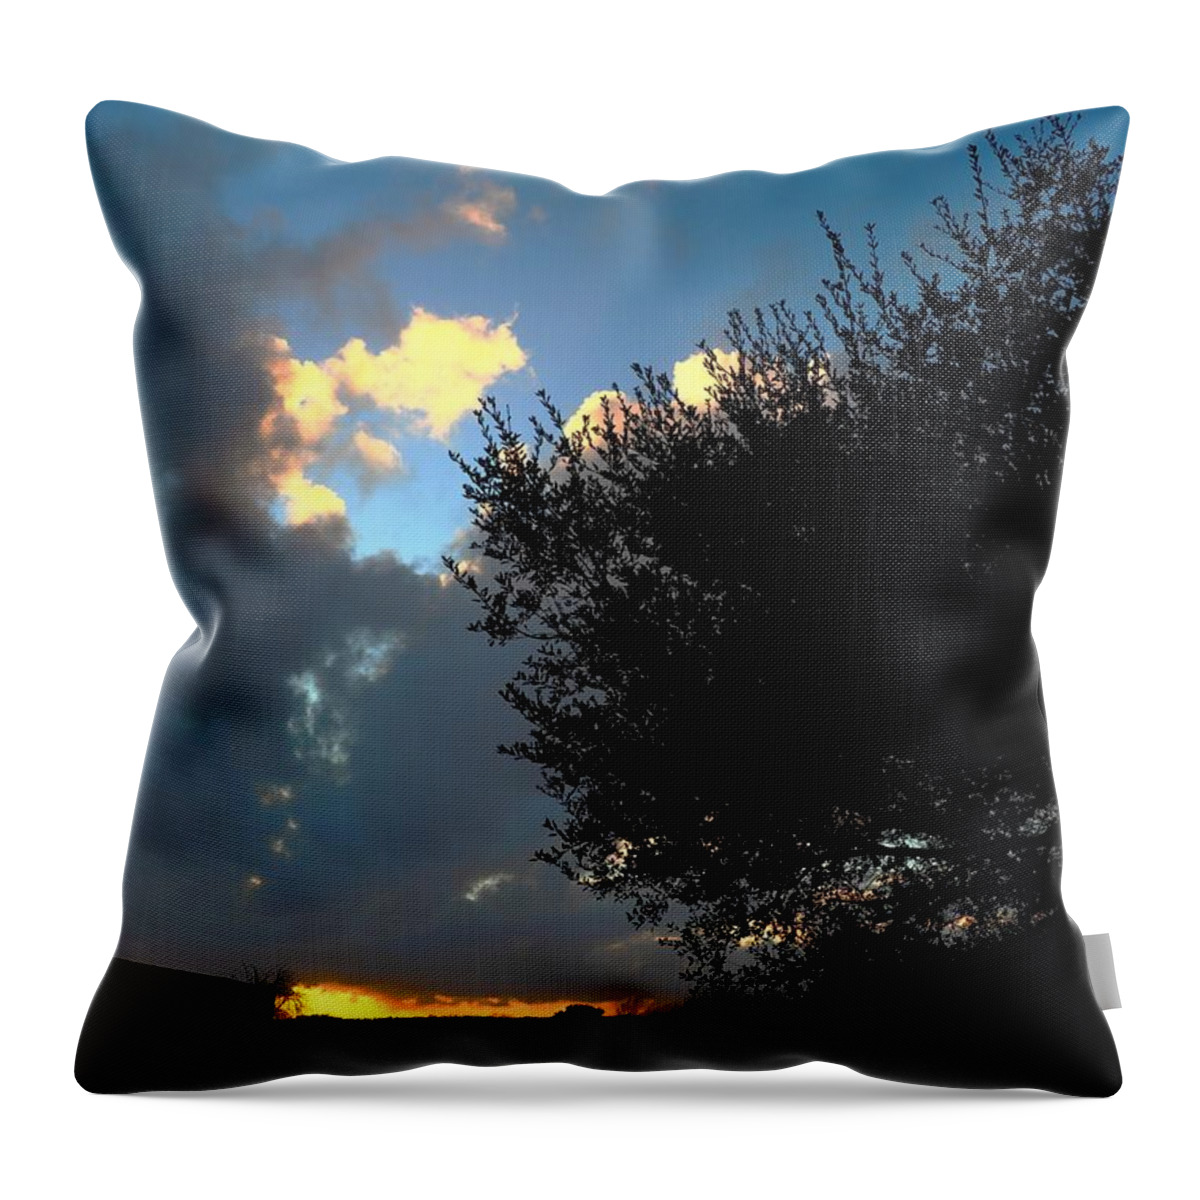 Weather Throw Pillow featuring the photograph Stormy Sundown by Richard Thomas